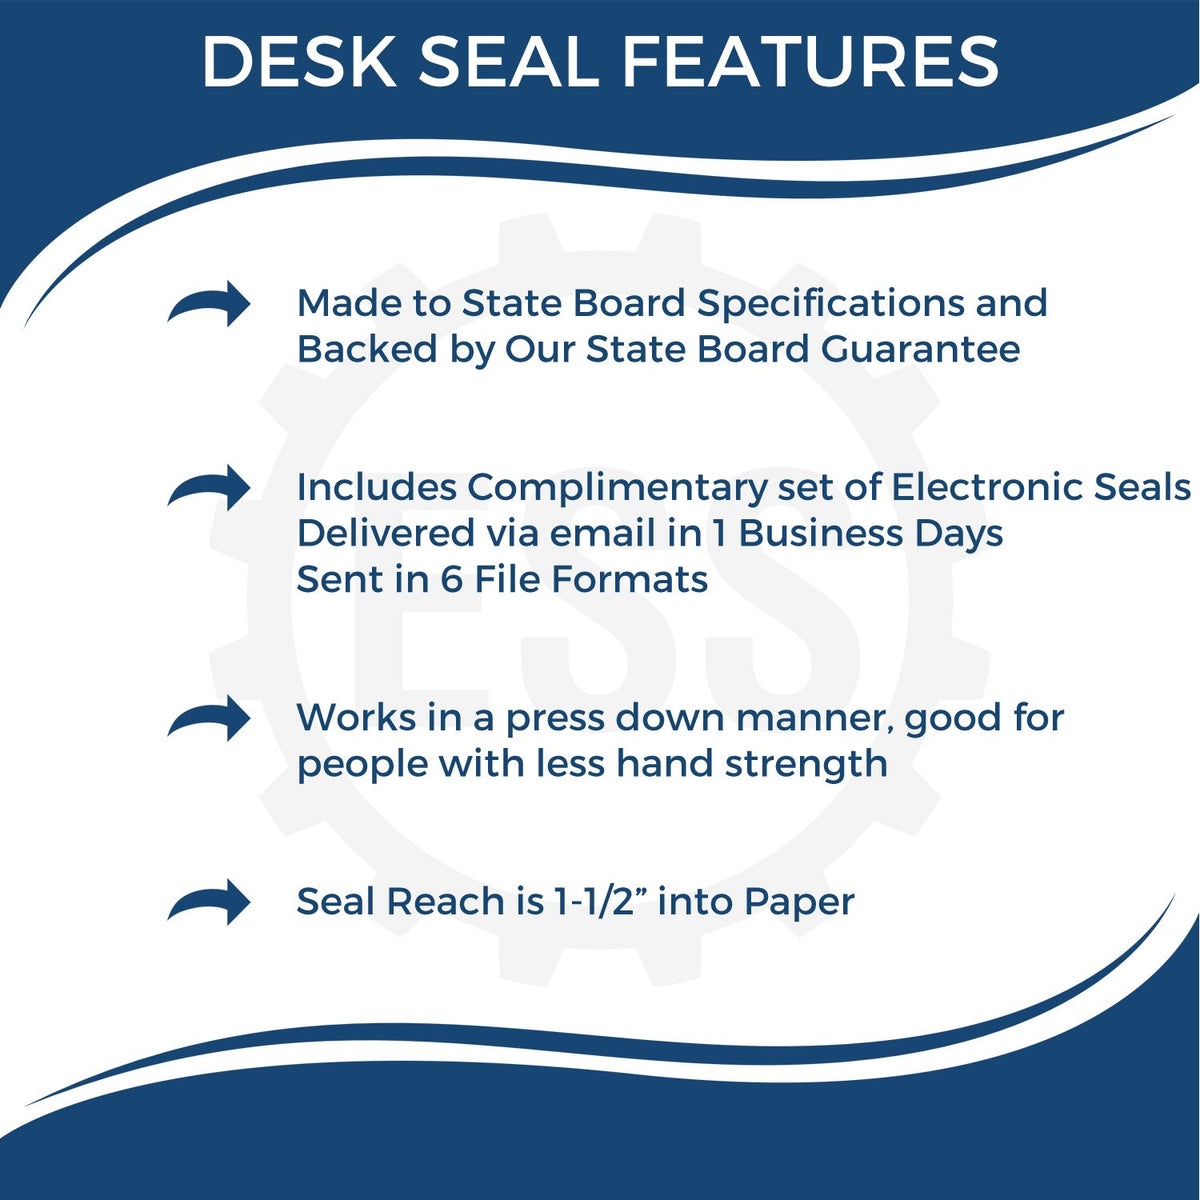 A picture of an infographic highlighting the selling points for the South Carolina Geologist Desk Seal